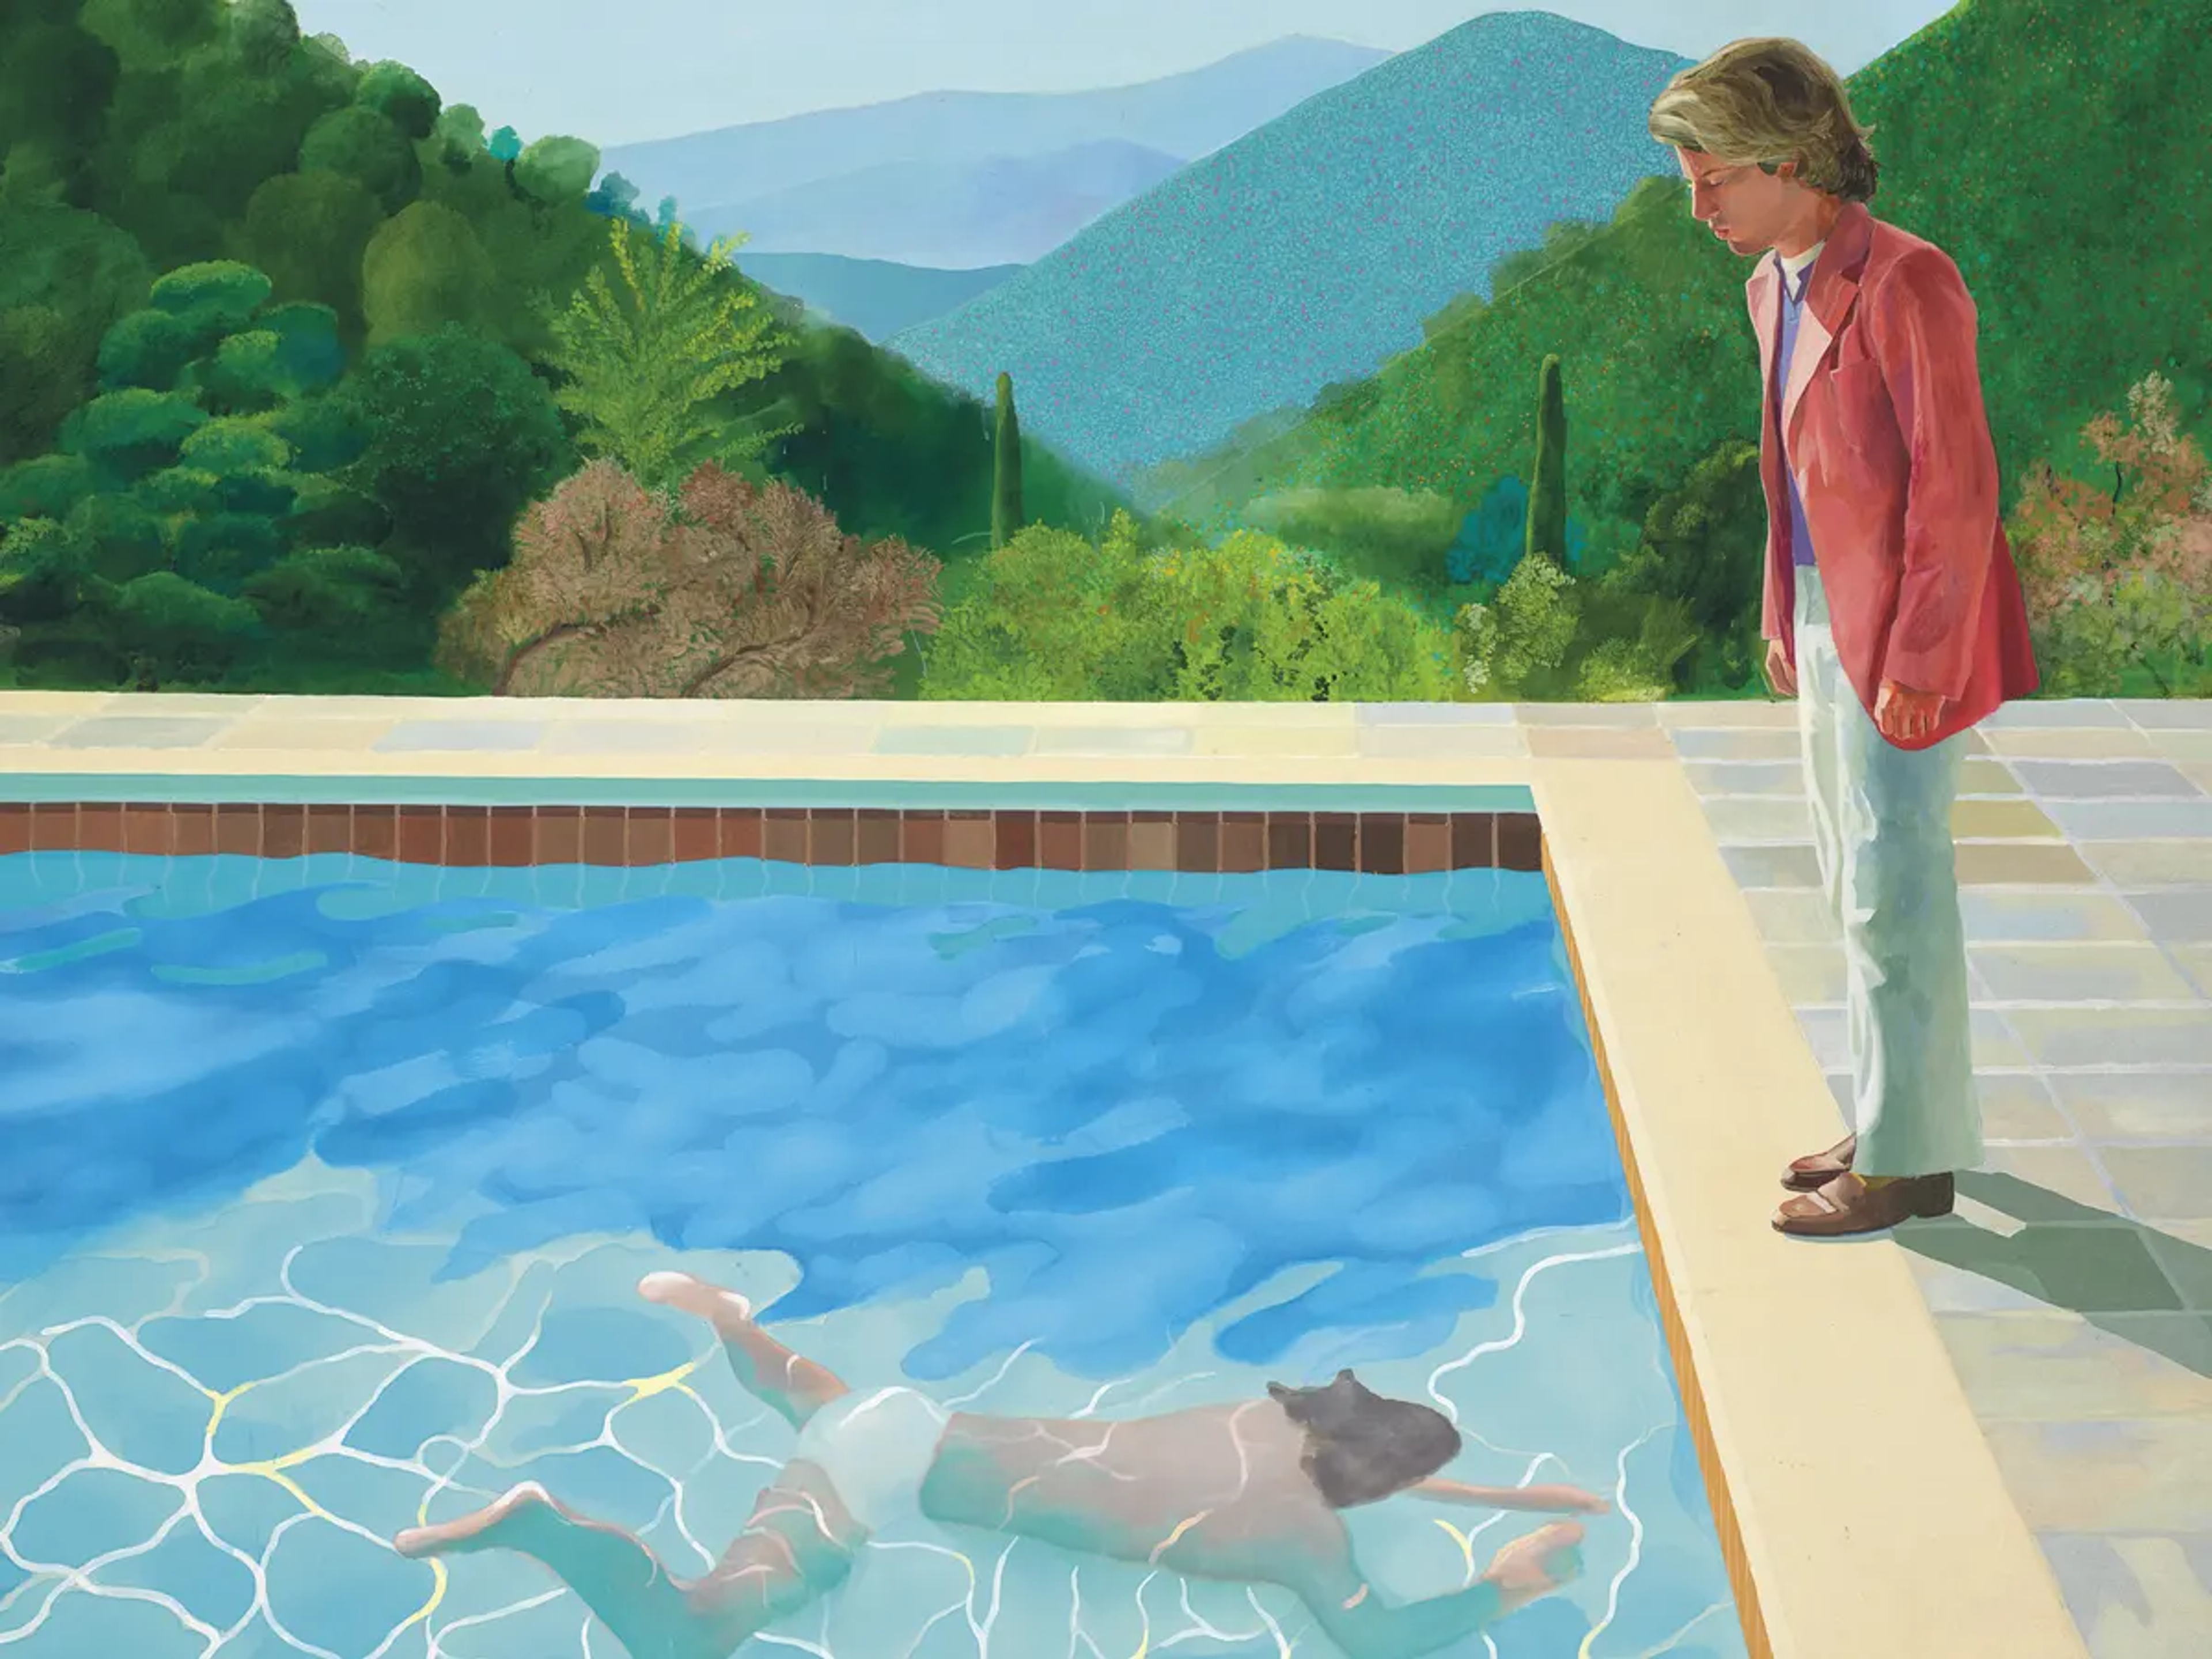 David Hockney’s Portrait Of An Artist (Pool With Two Figures). An acrylic on canvas work of a man watching another man swimming in a pool outdoors. 